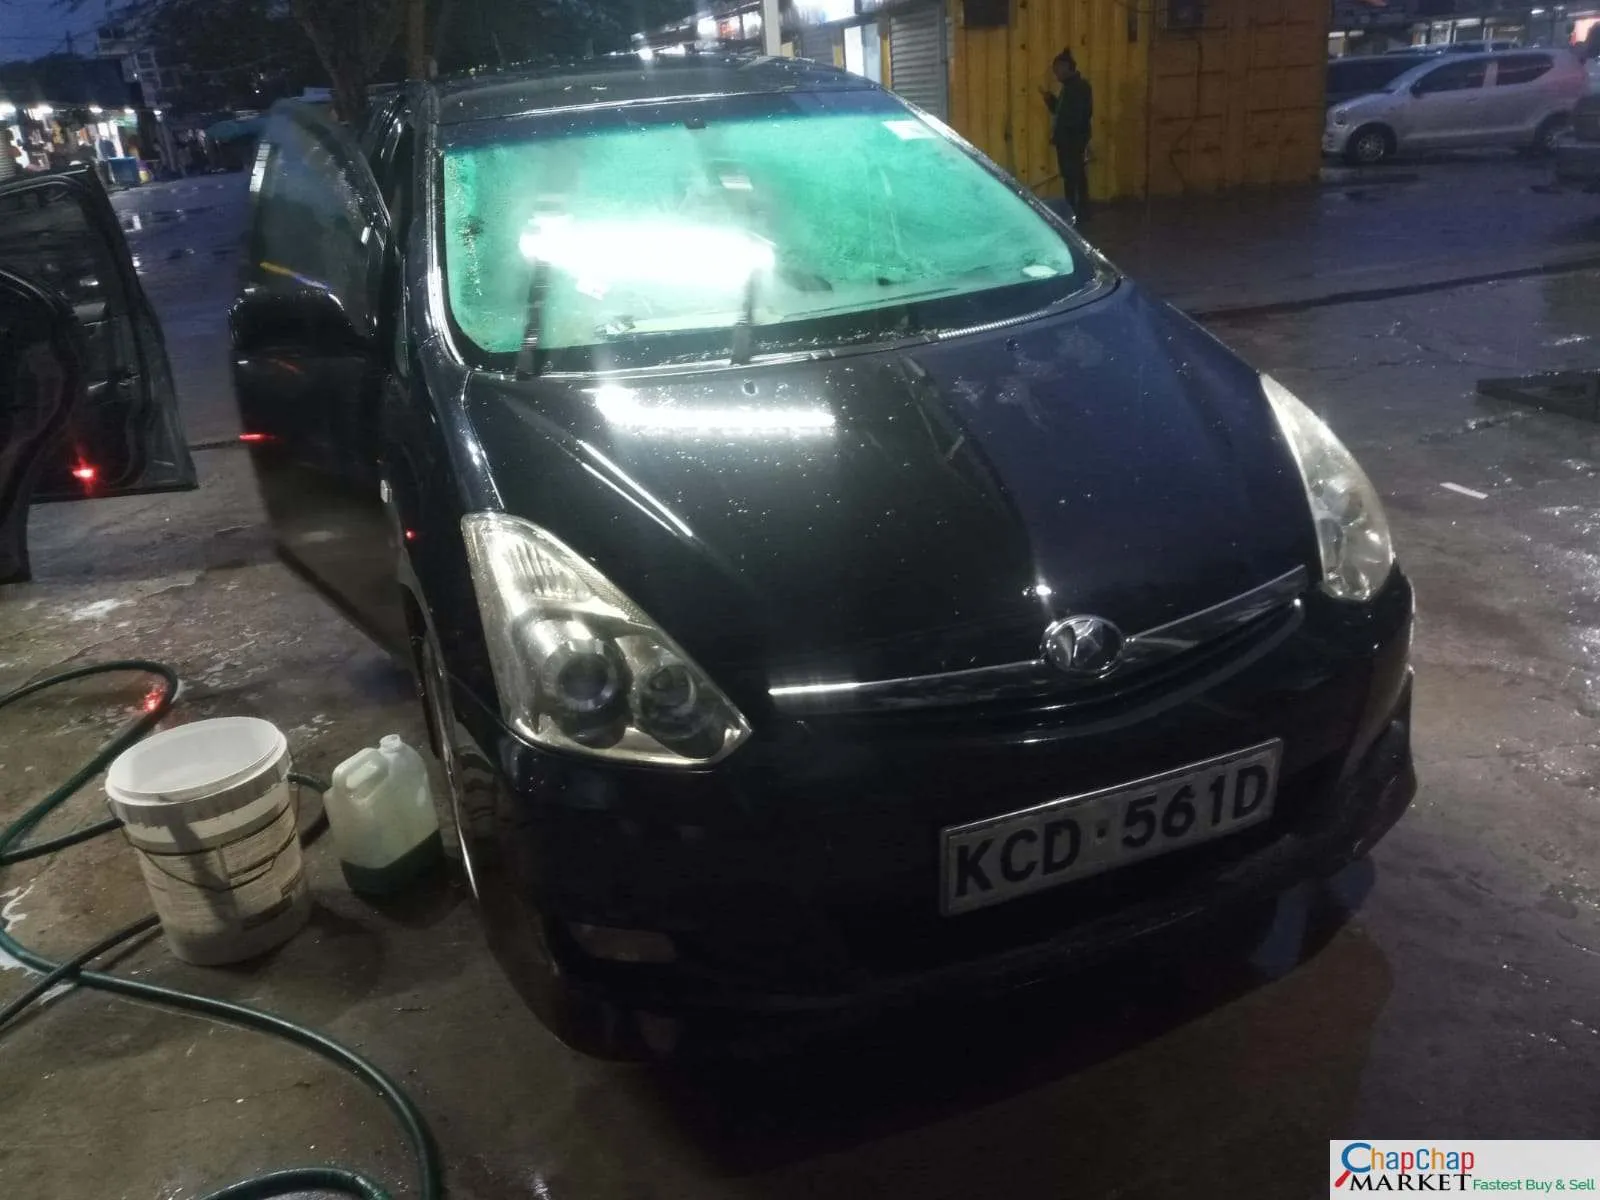 Cars Cars For Sale/Vehicles-Toyota WISH QUICKEST SALE You Pay 30% Deposit Trade in OK EXCLUSIVE 🔥